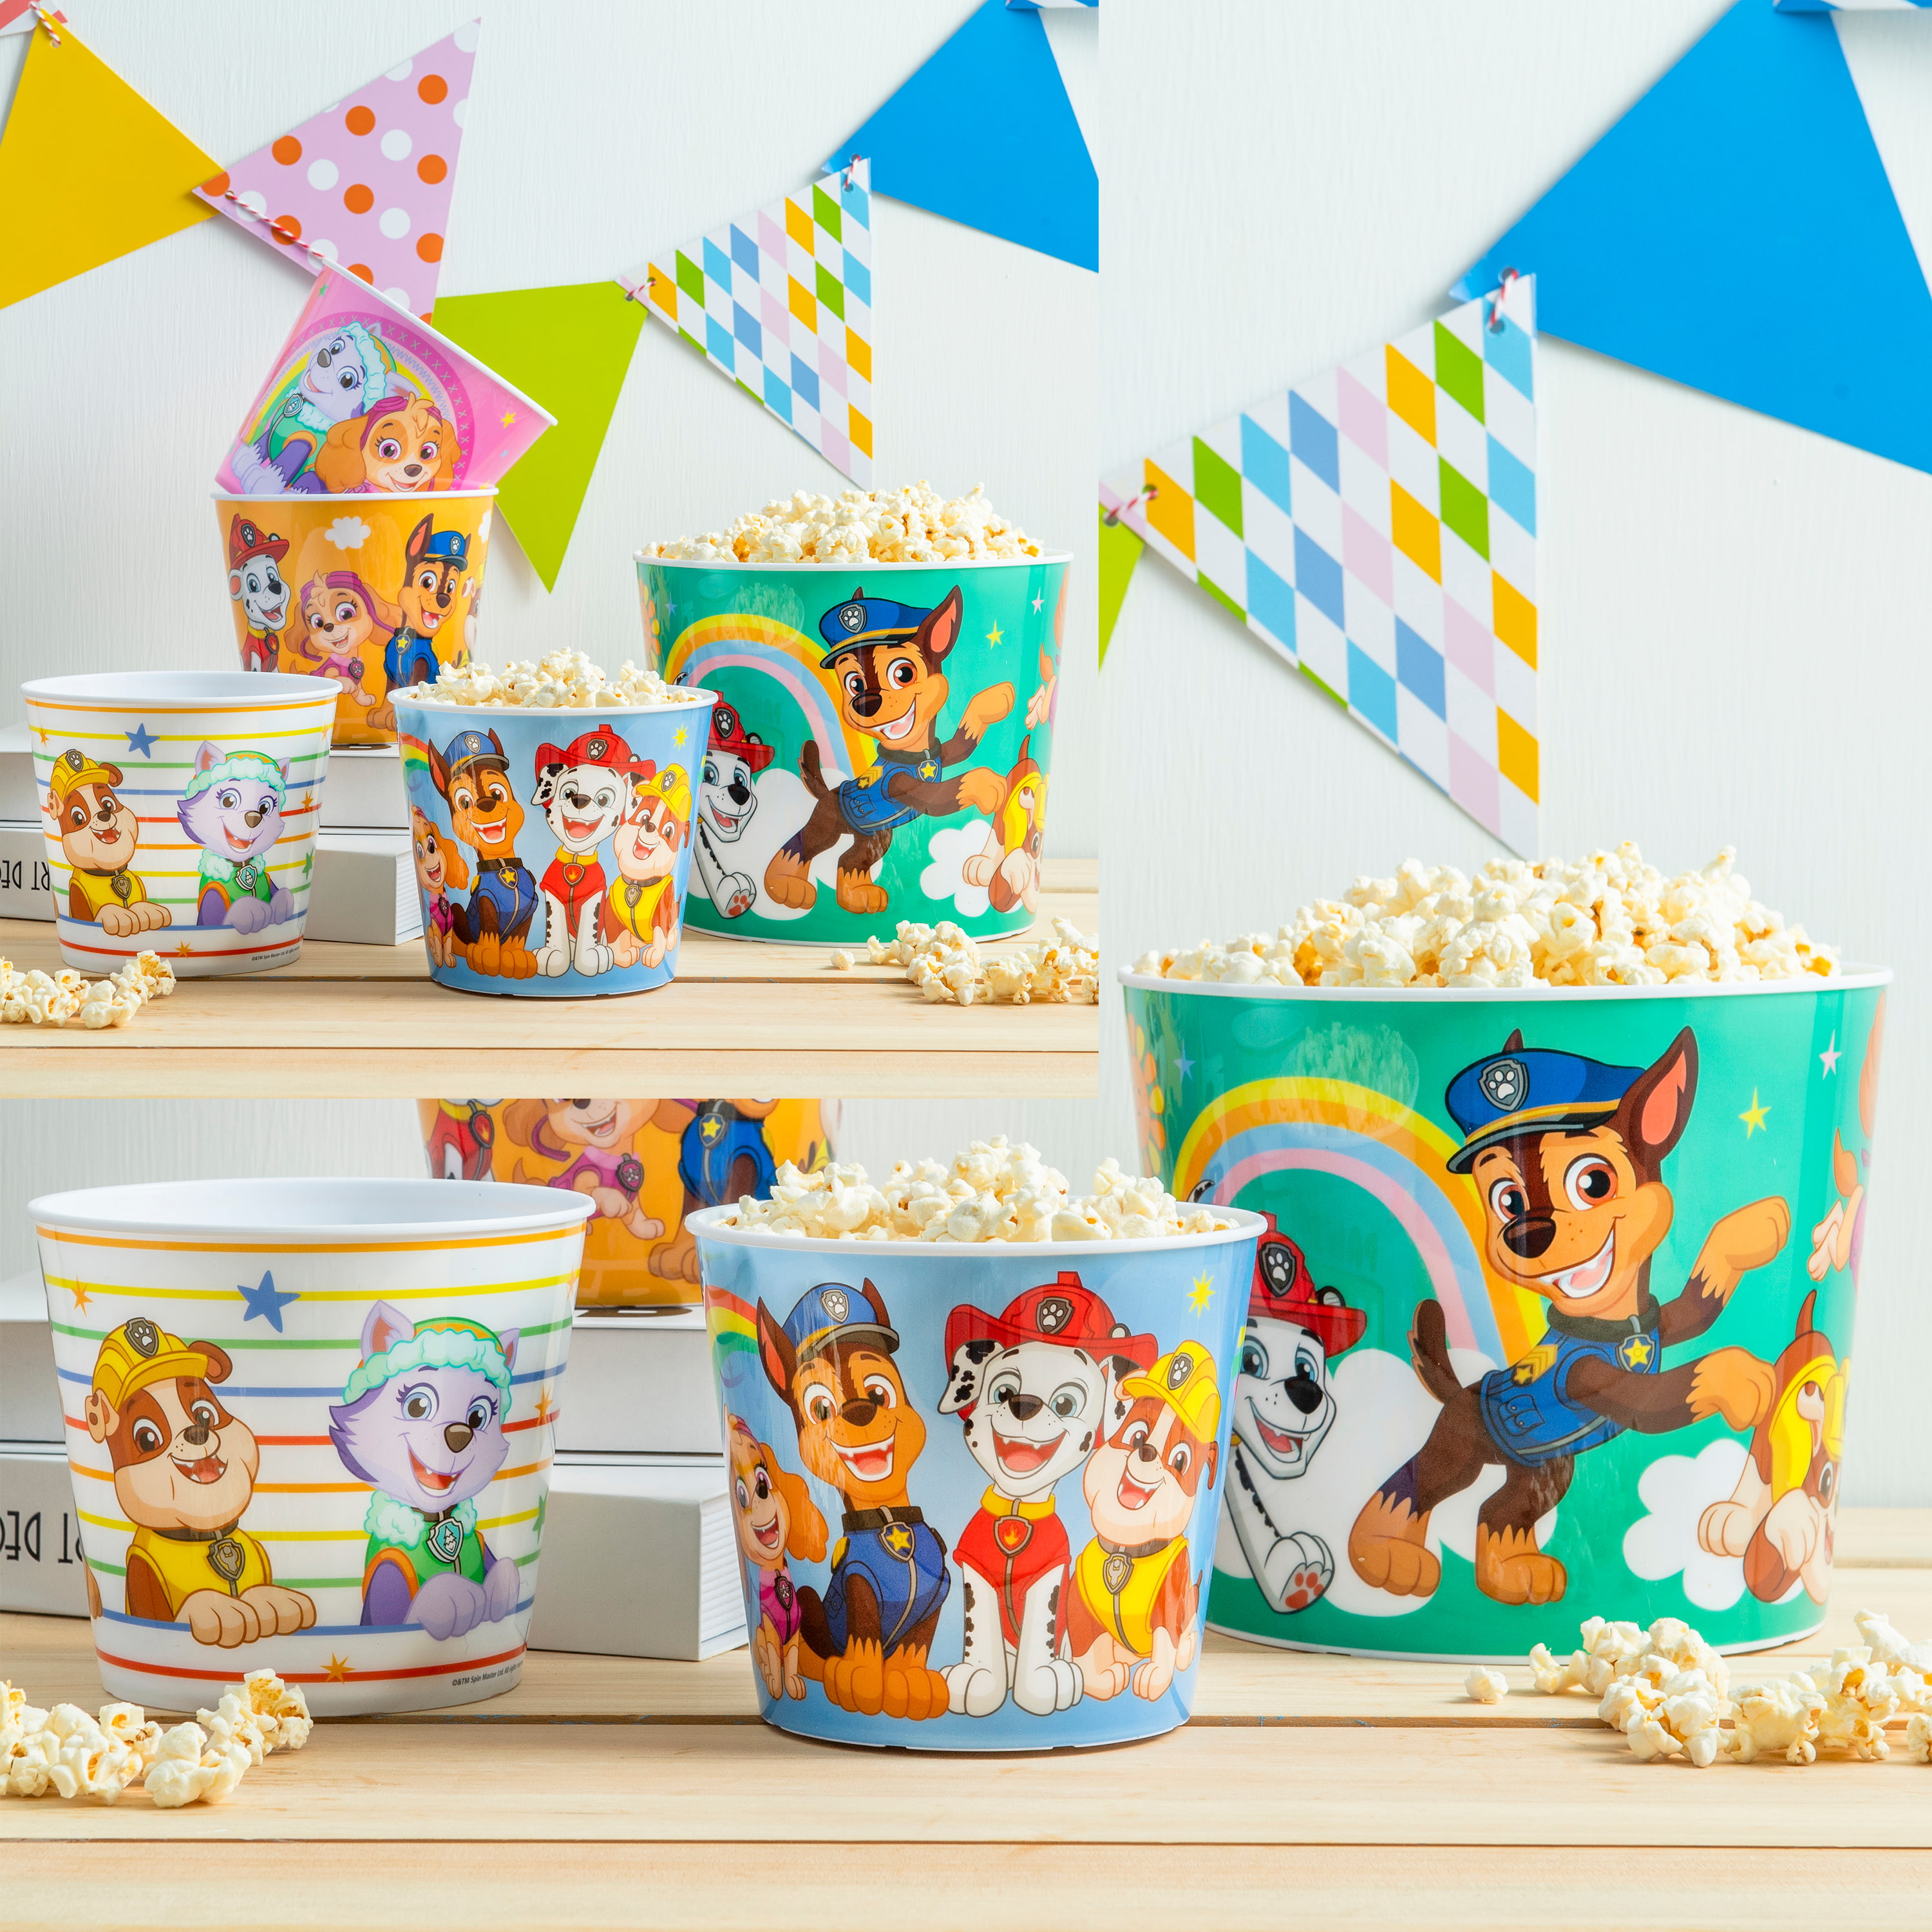 Paw Patrol Plastic Popcorn Container and Bowls, Chase, Marshall and Friends, 5-piece set slideshow image 8